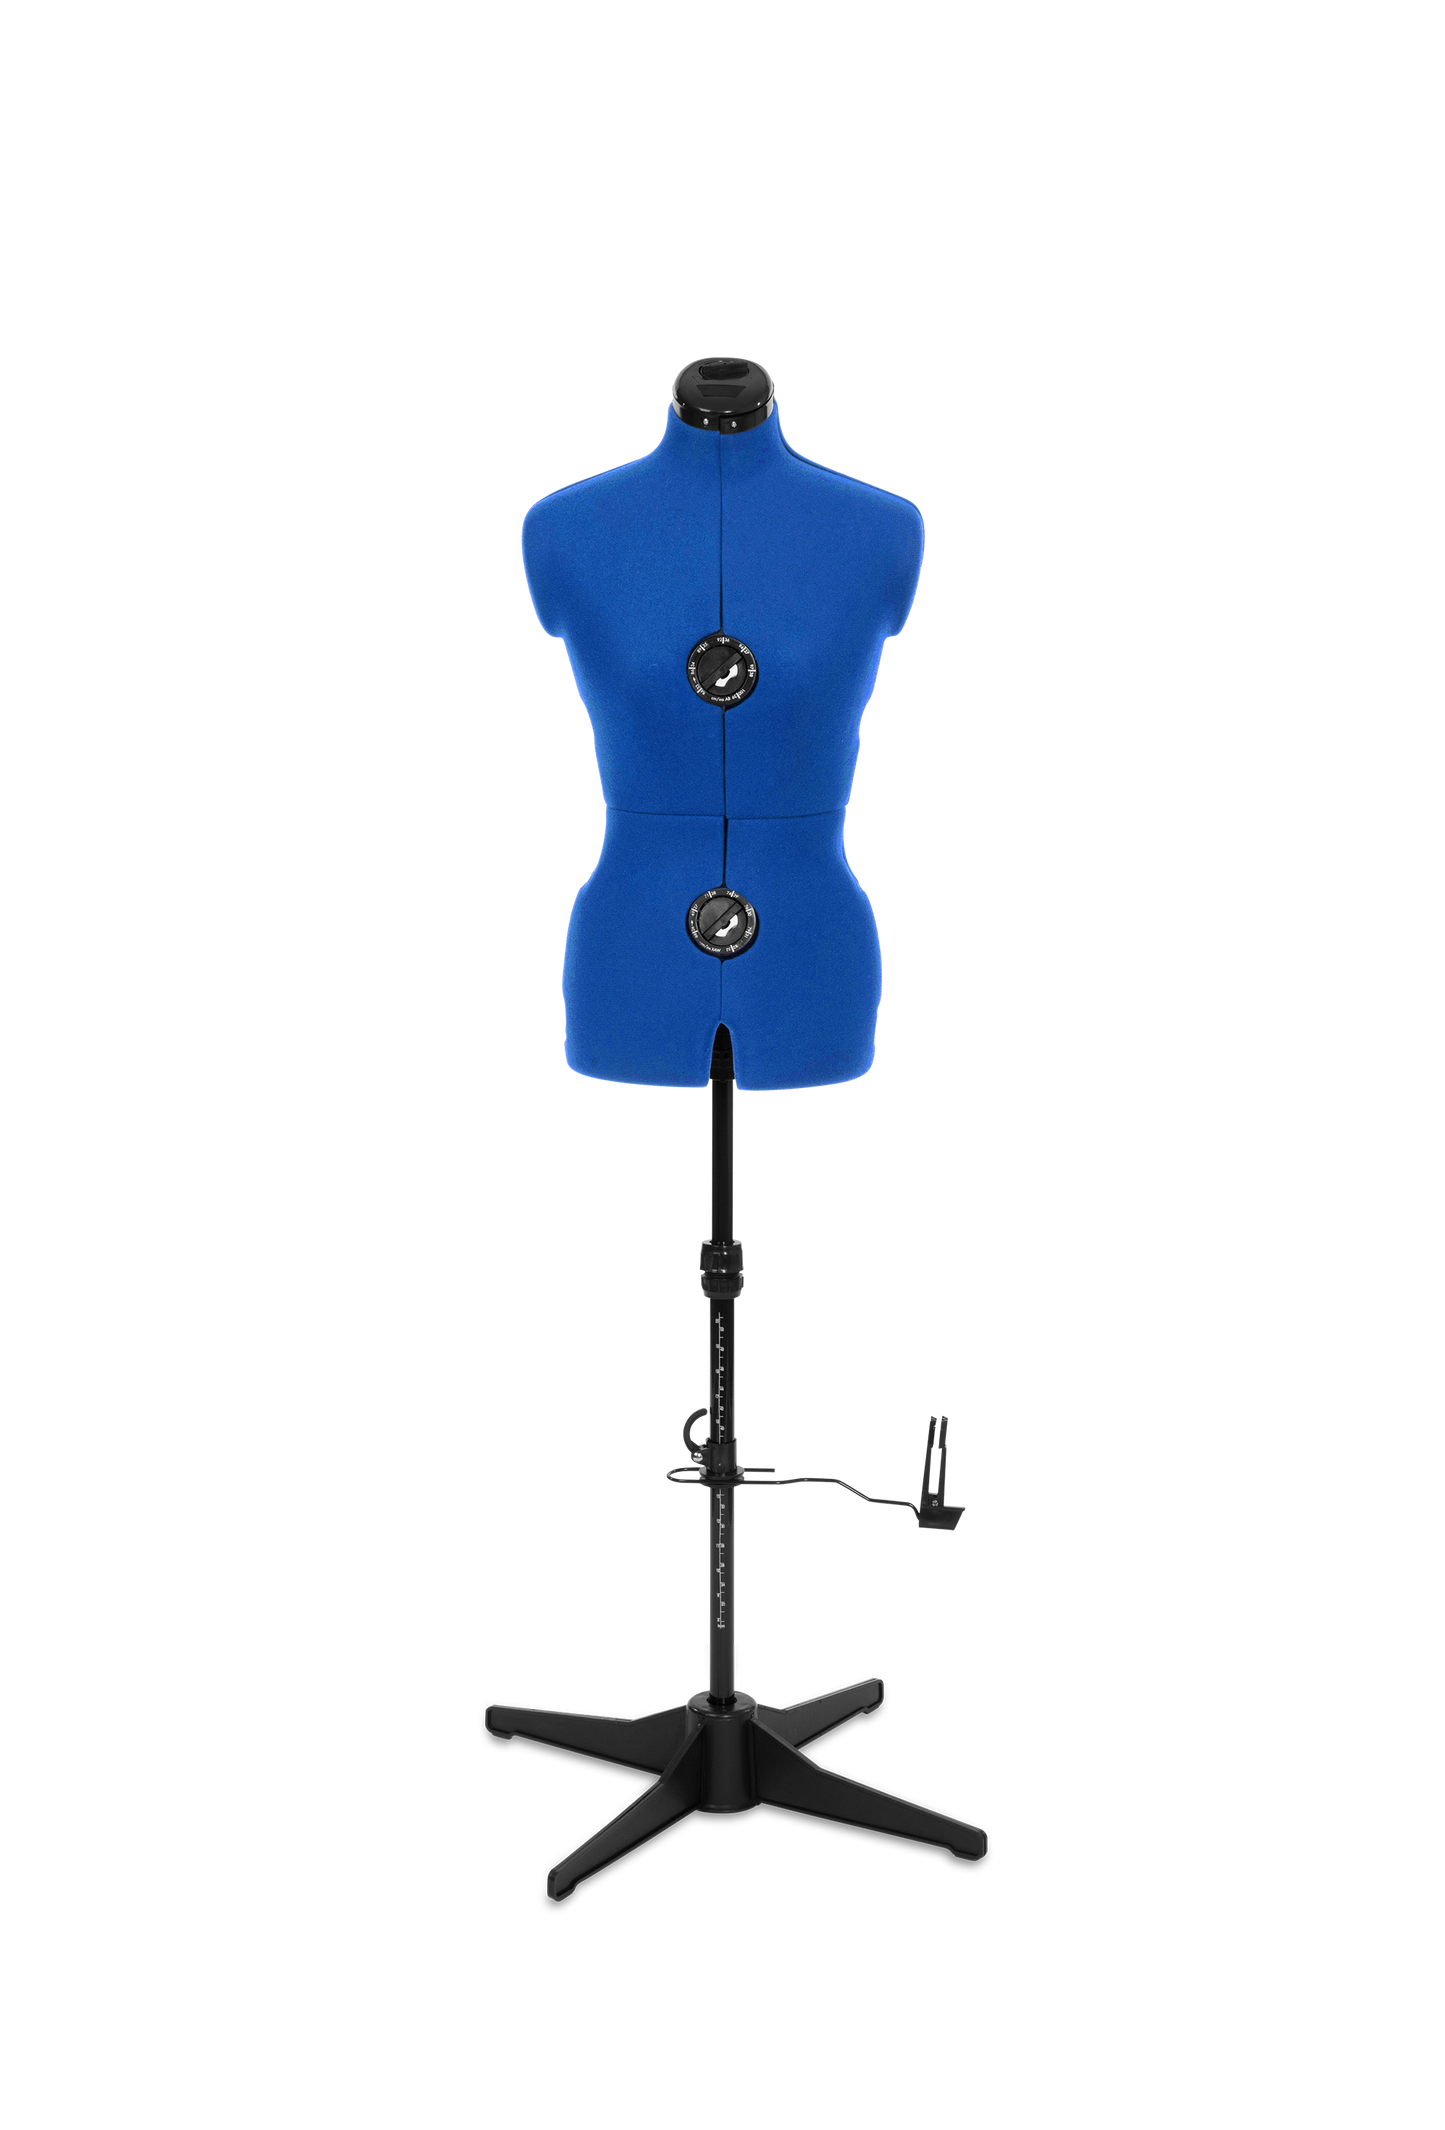 Adjustoform Elizabeth Tailormaid Dress Form with Stand and Base - Blue - Heavy Duty Adjustable Dress Form with 8 part body and 11 adjusters - Dress sizes from 6 to 24